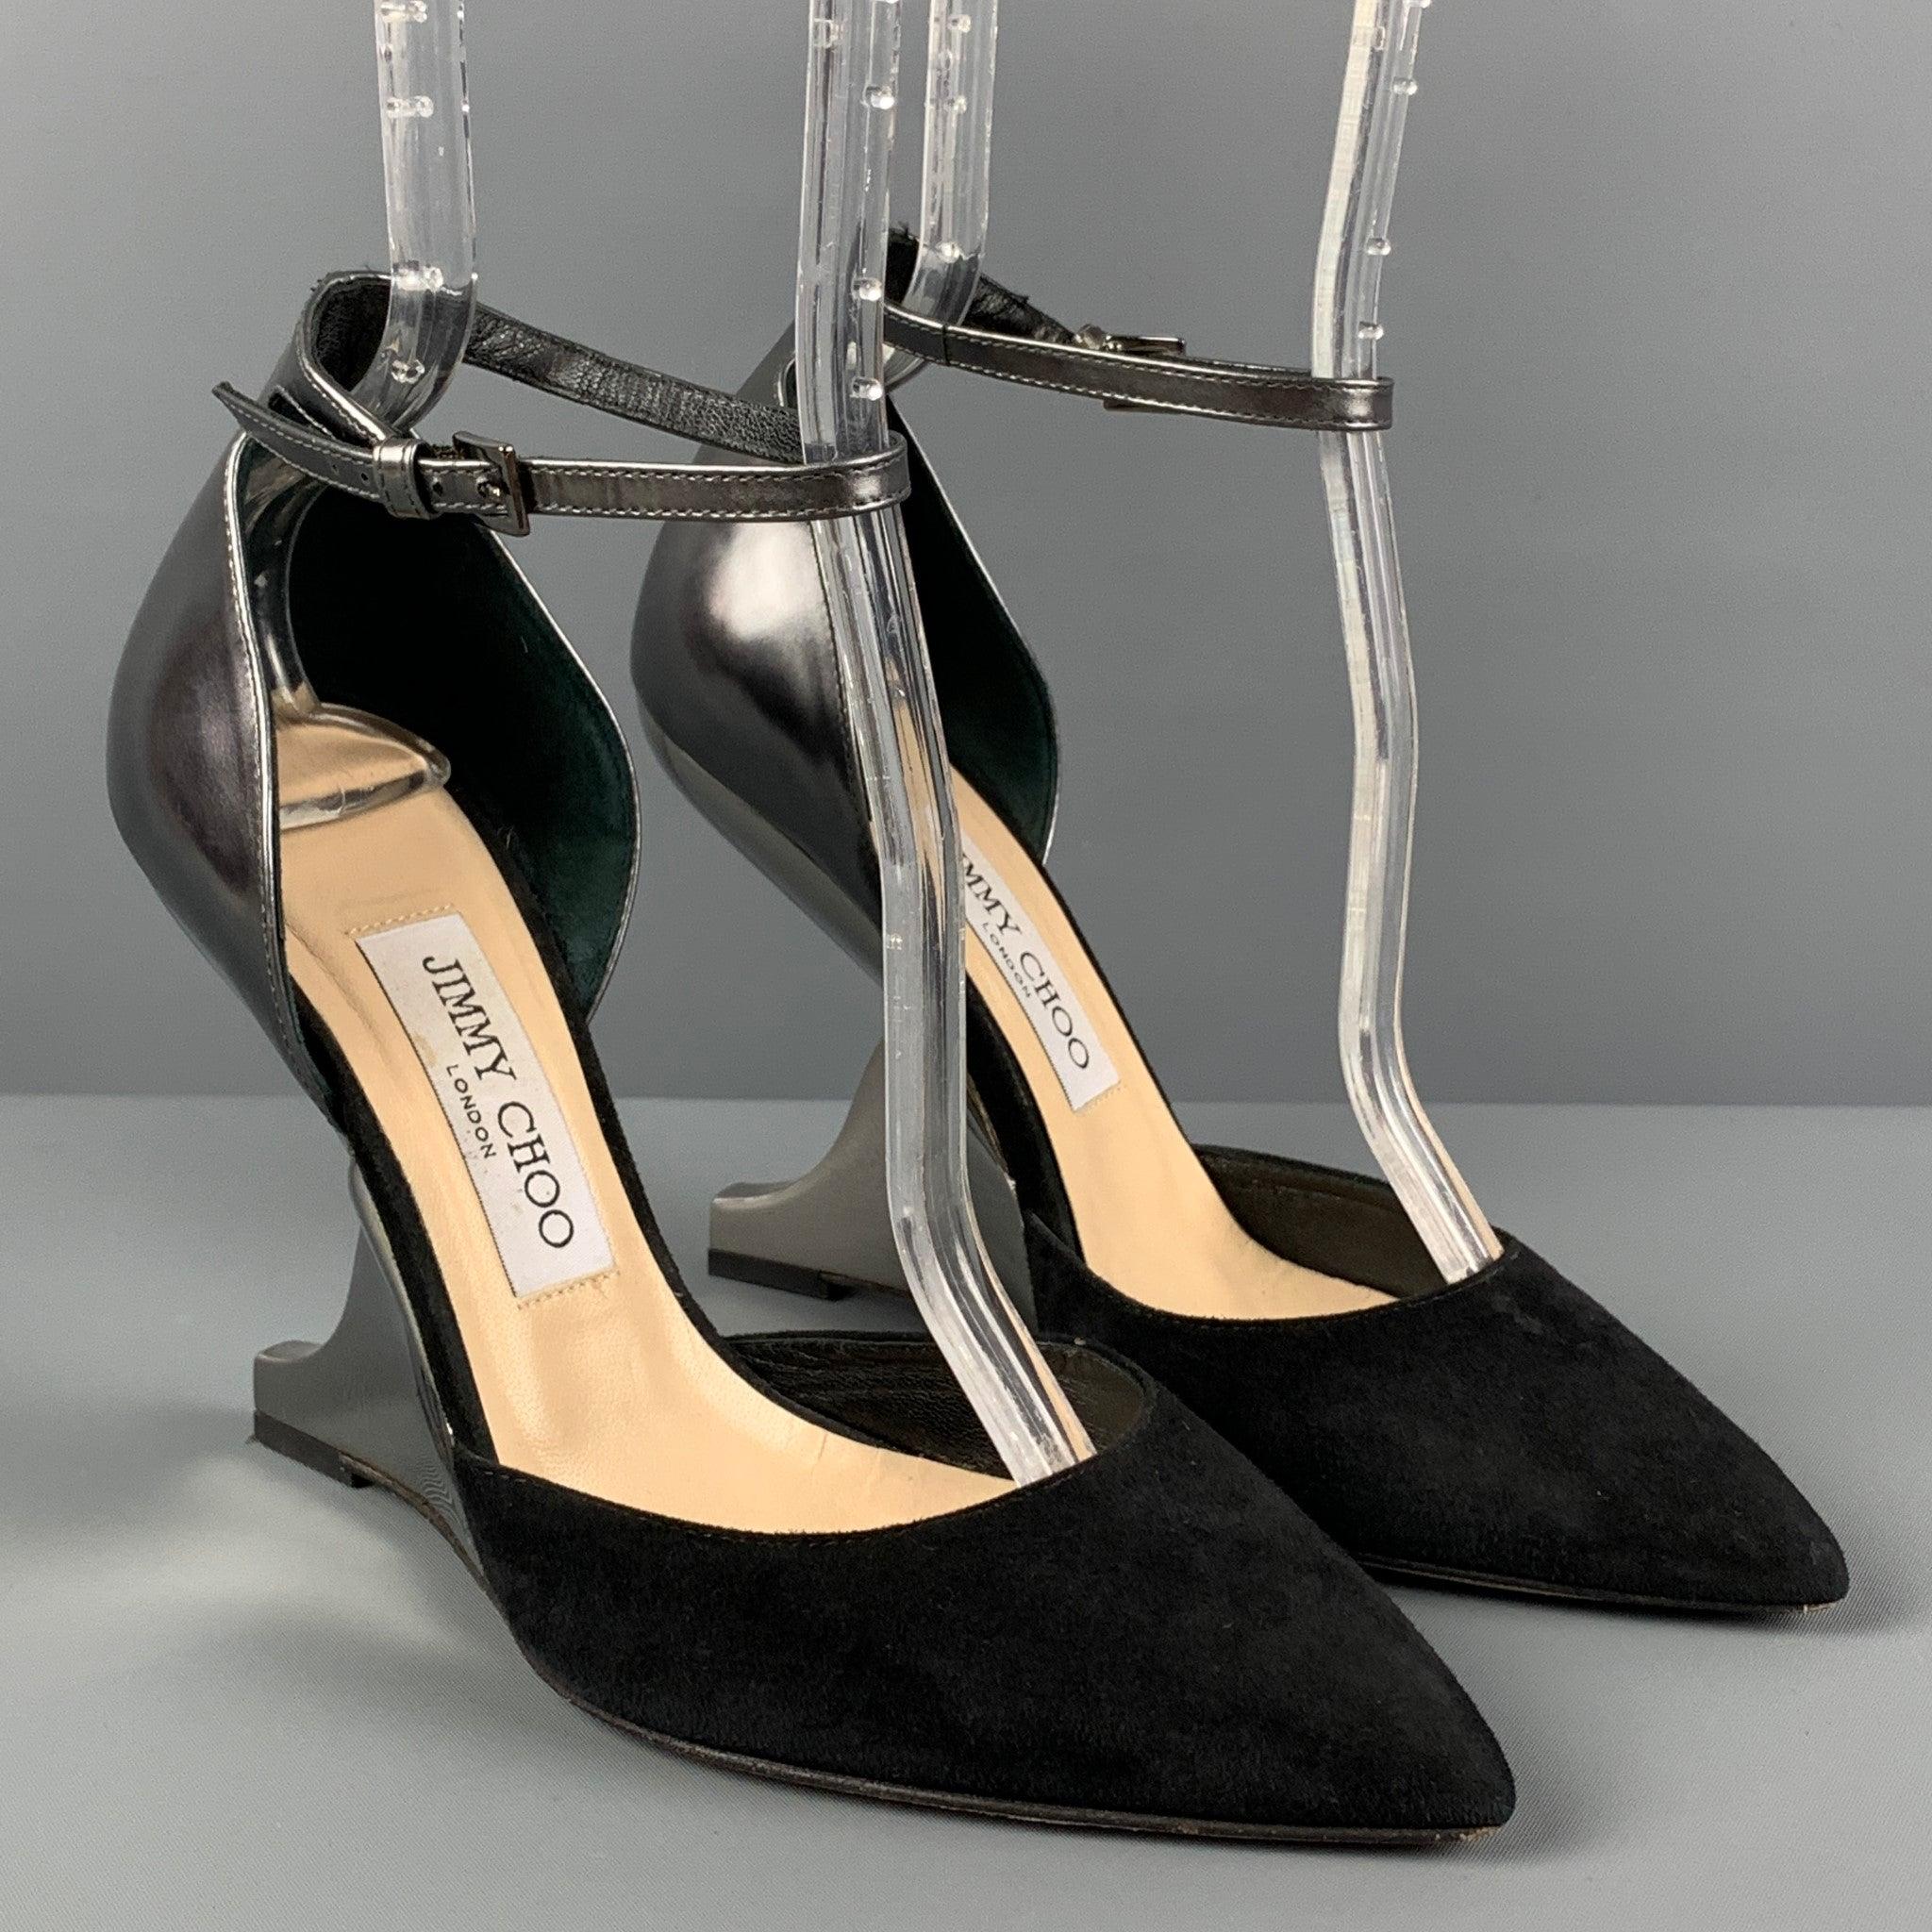 JIMMY CHOO pumps comes in a black suede with a silver leather panel featuring a pointed toe, ankle strap, and a curved mirrored heel. Made in Italy.
Very Good
Pre-Owned Condition. 

Marked:   37.5 

Measurements: 
  Heel: 4.25 inches 
  
  
